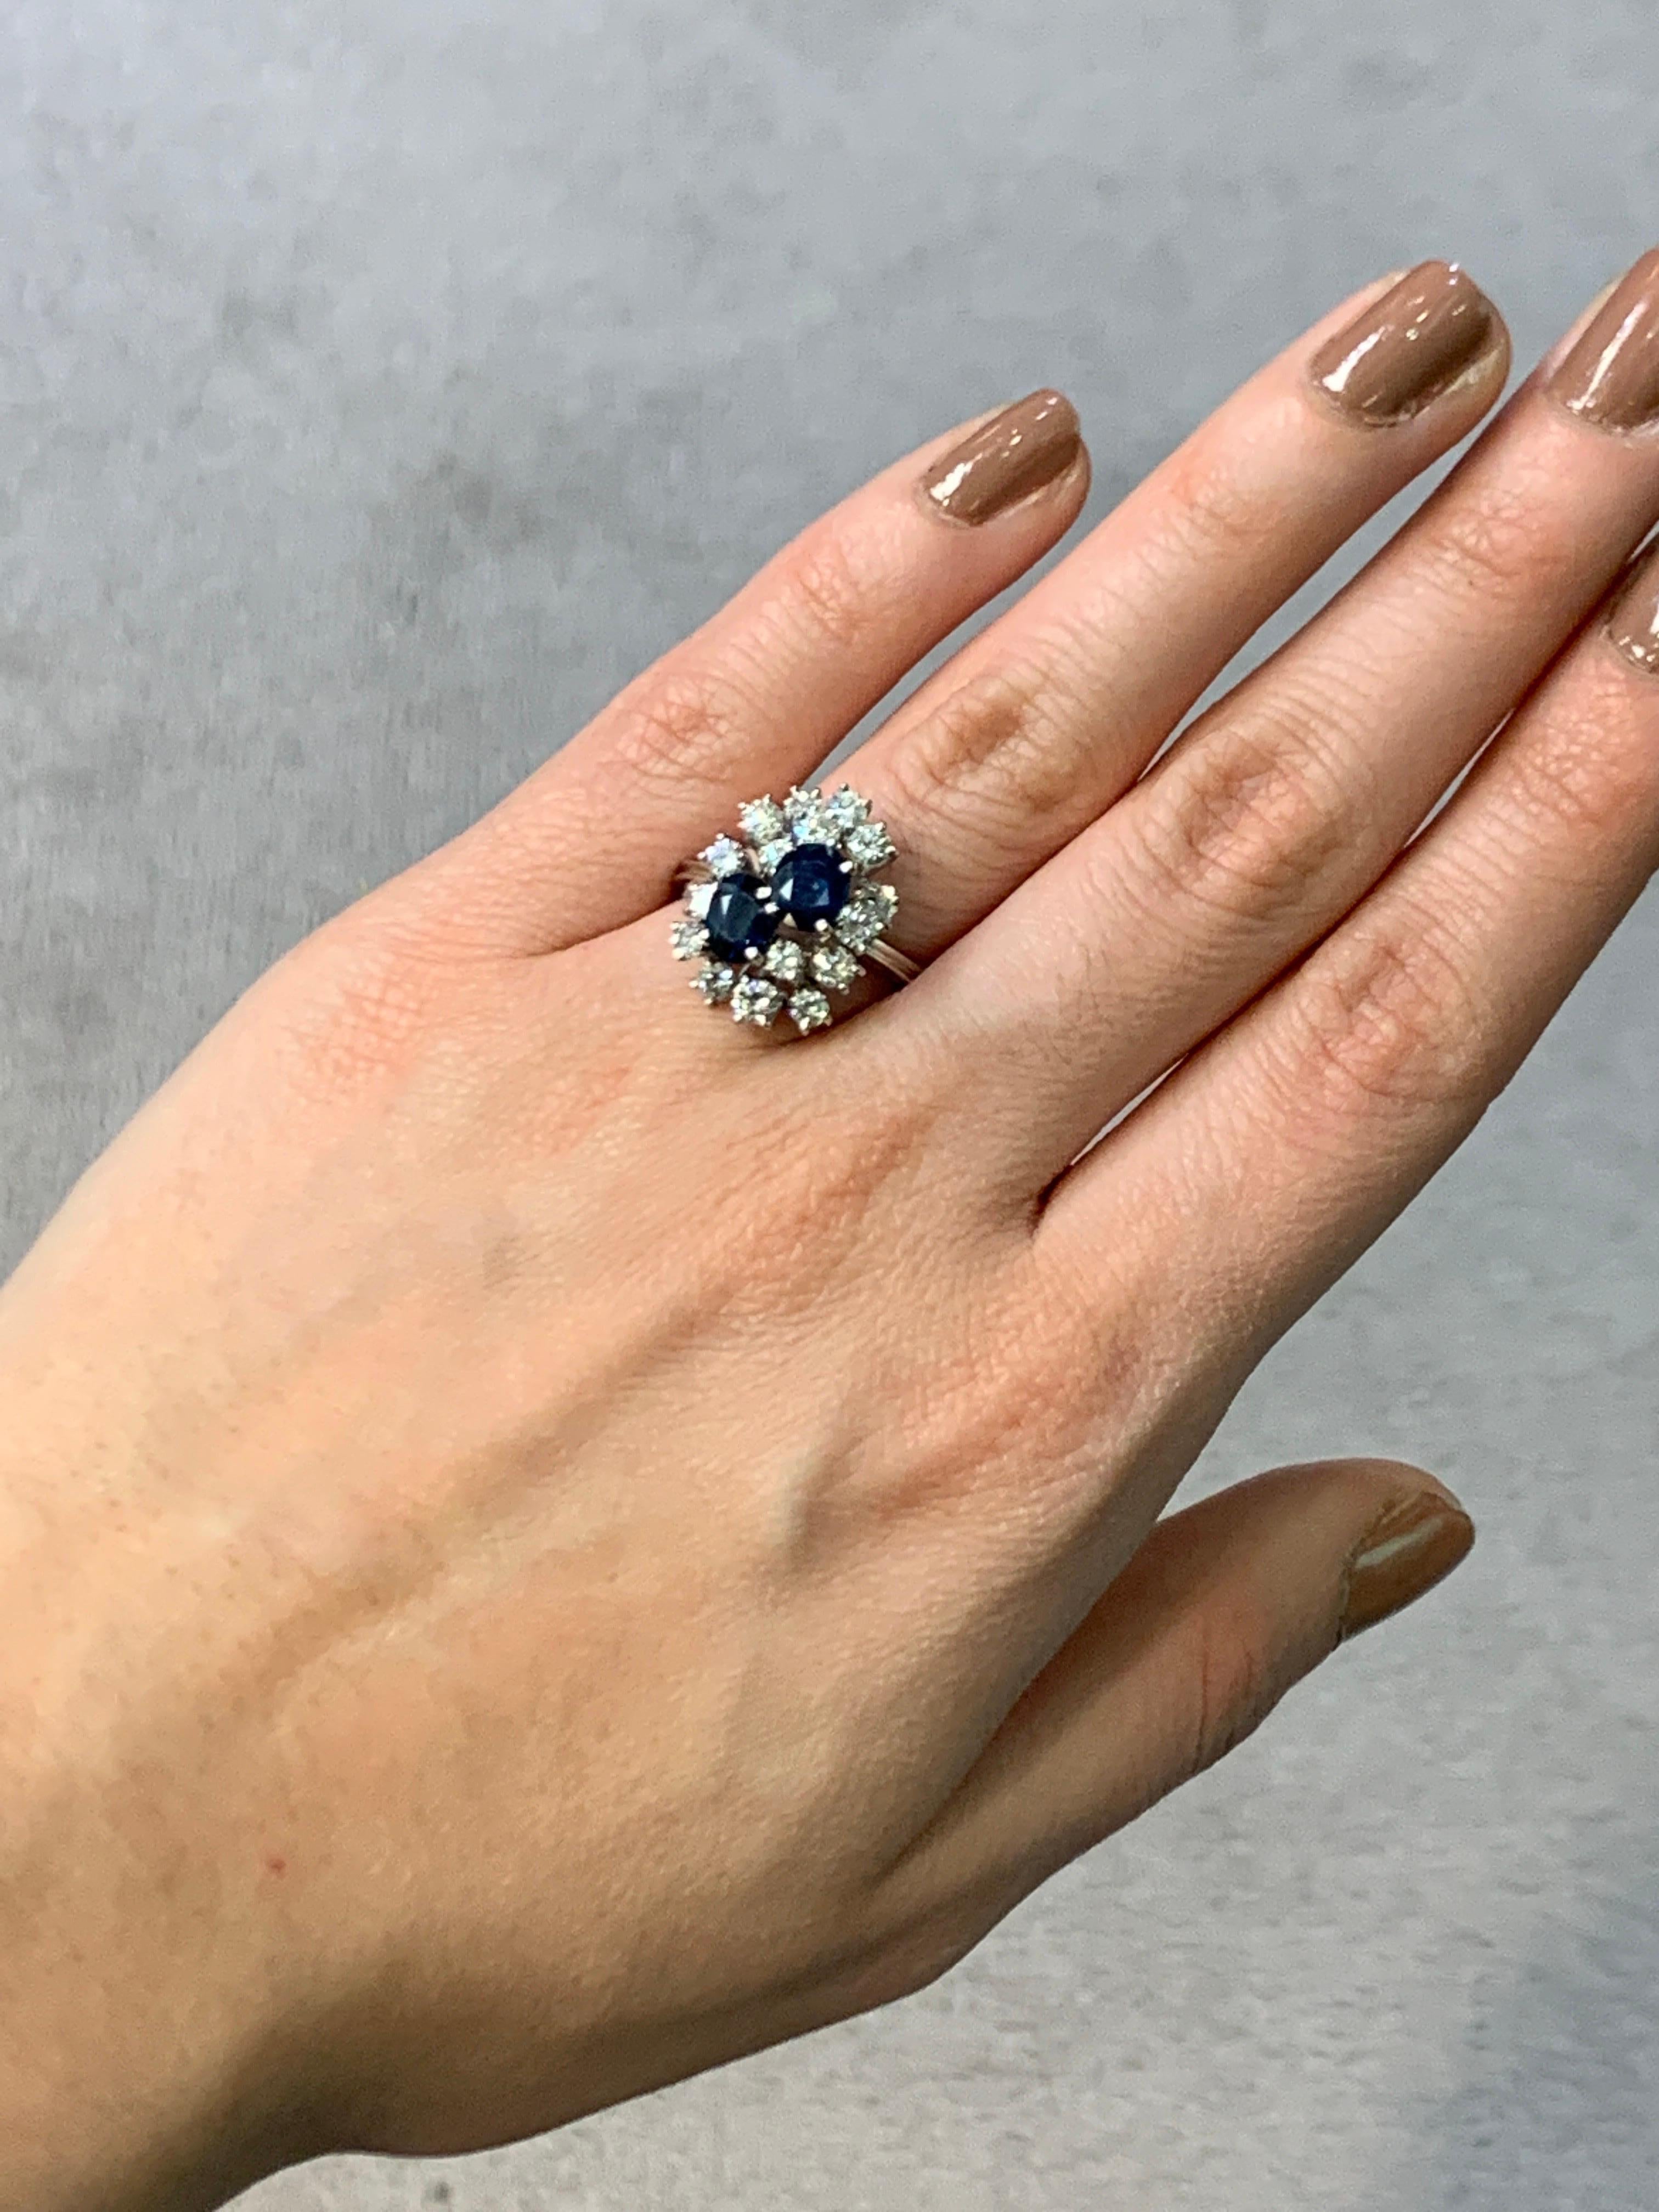 Sapphire and Diamond Cluster Ring

A white gold ring set with two oval cut sapphires surrounded by a cluster of round cut diamonds. 

Metal Type: 18 Karat Gold 

Ring Size: 6.5 

Resizable free of charge